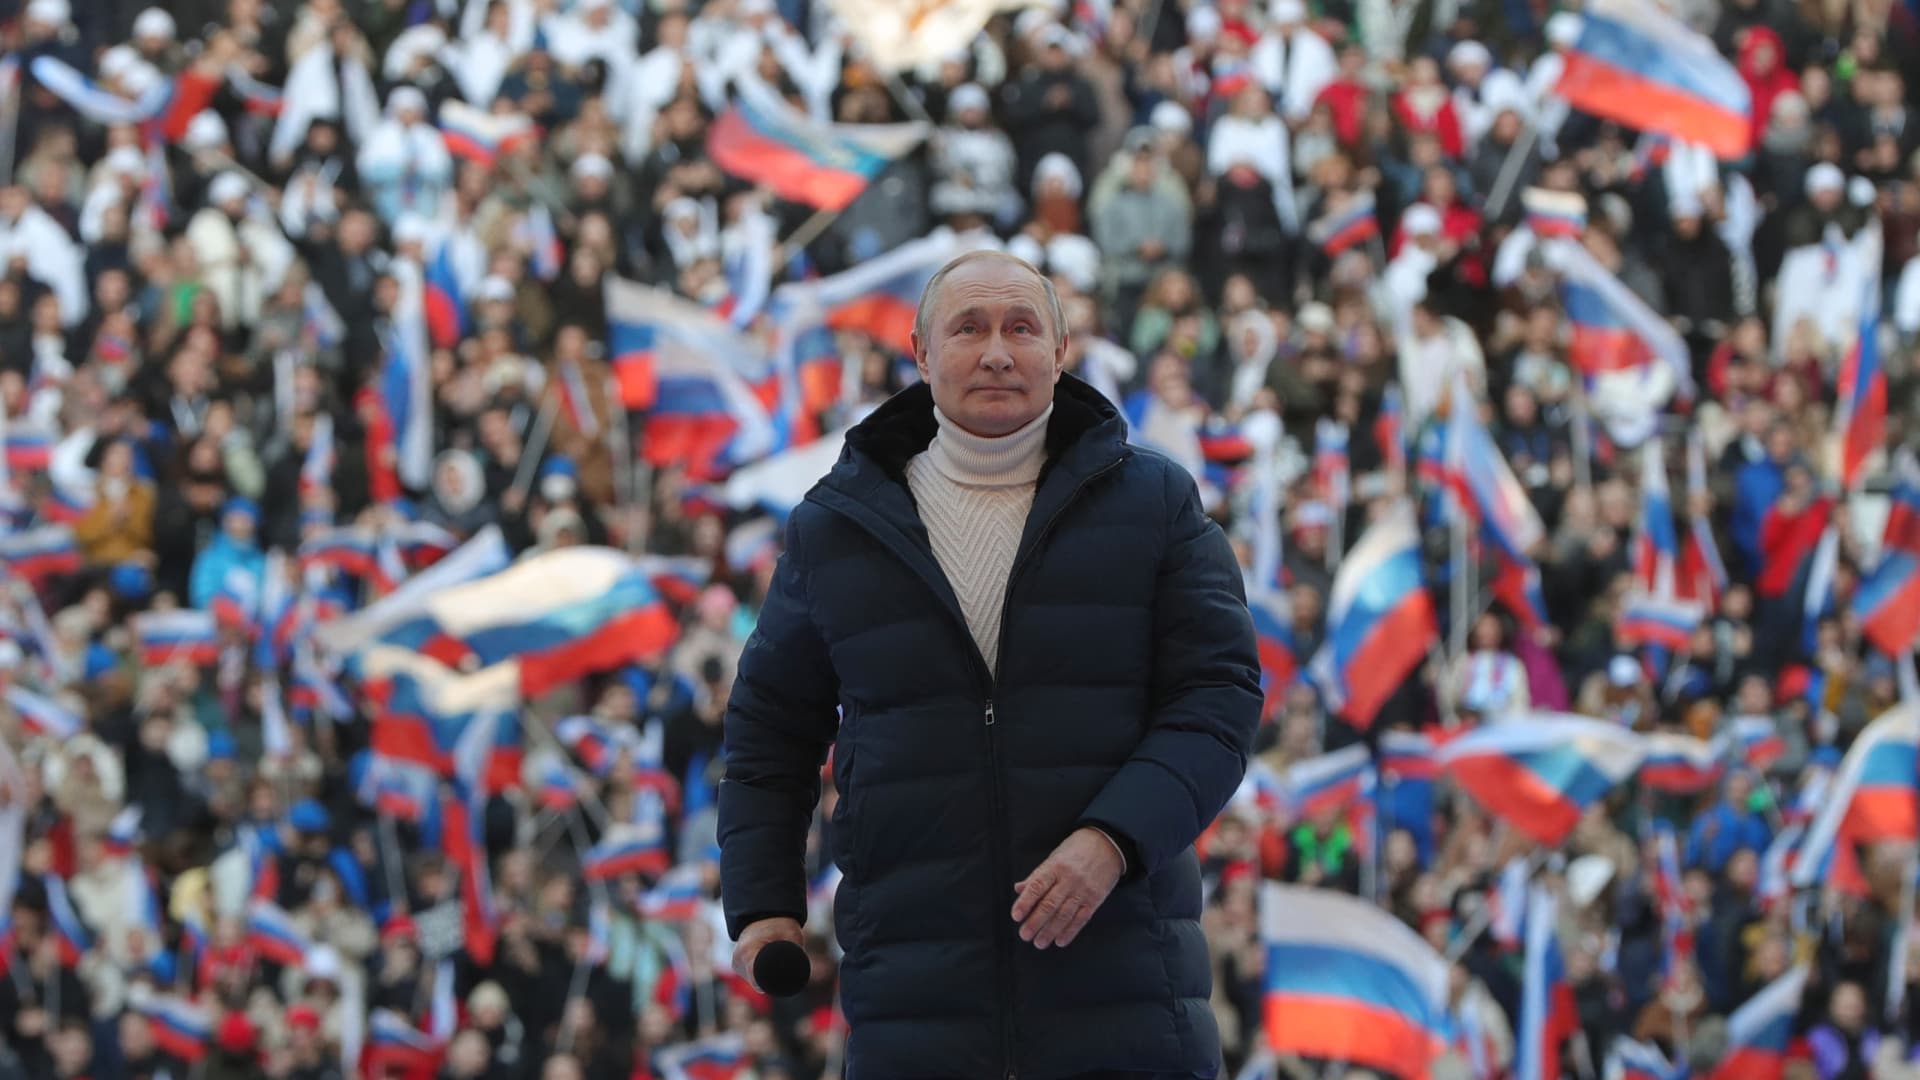 Russian President Vladimir Putin attends a concert marking the eighth anniversary of Russia's annexation of Crimea from Ukraine at the Luzhniki stadium in Moscow on March 18, 2022.